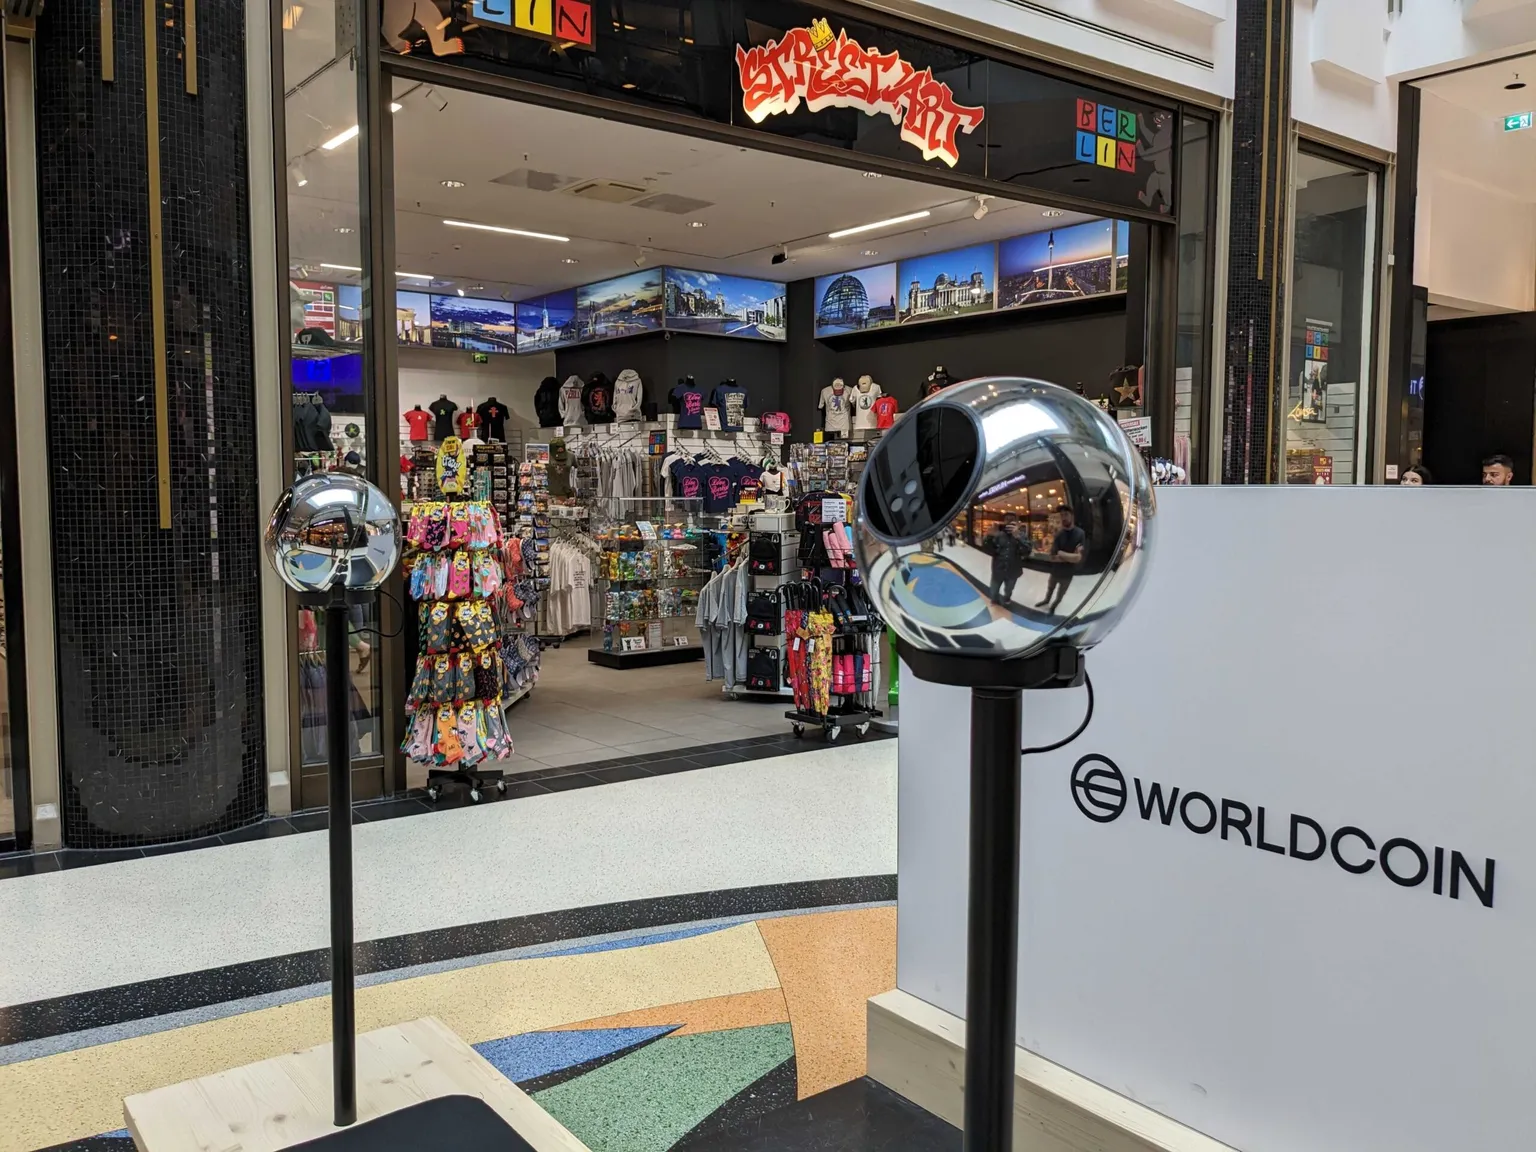 Two Worldcoin orbs standing on two polls in a mall.